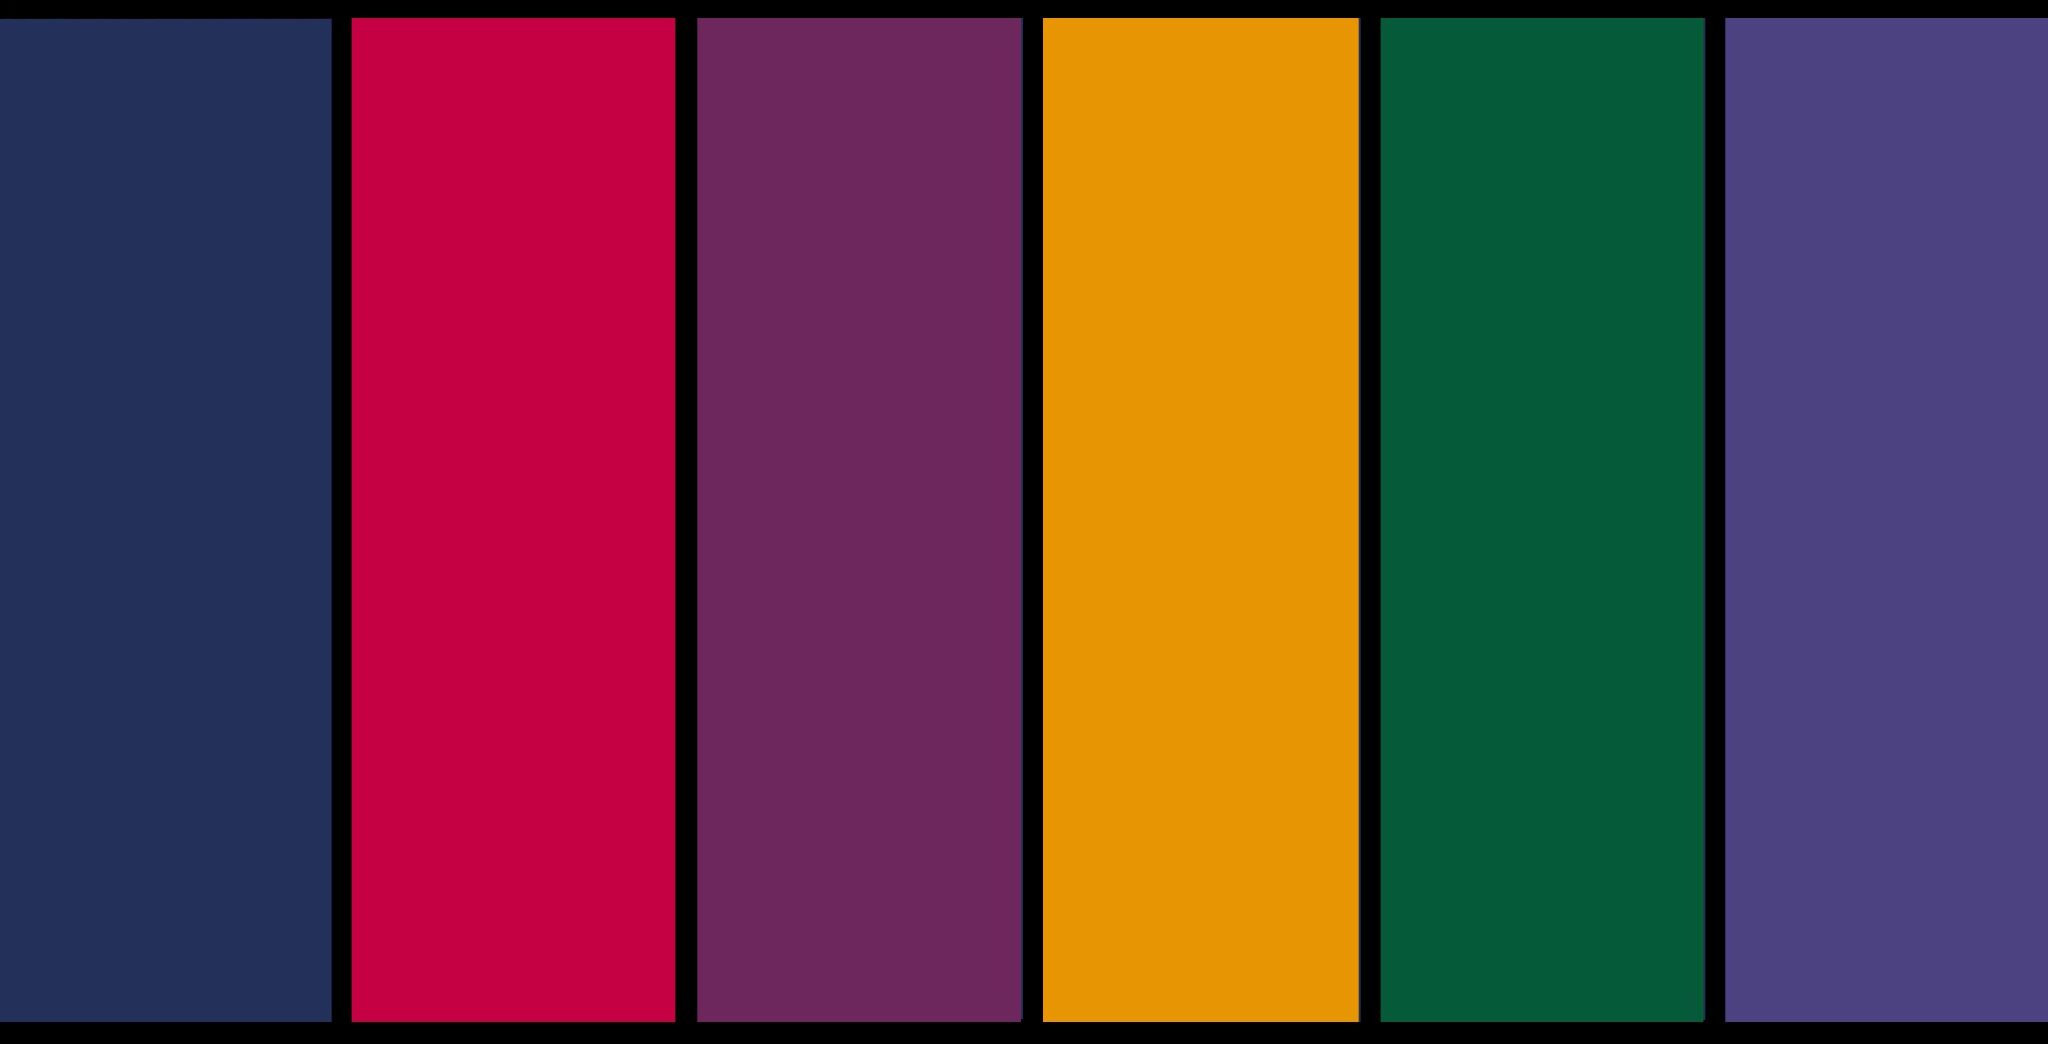 jewel tone colour palette from the 90s